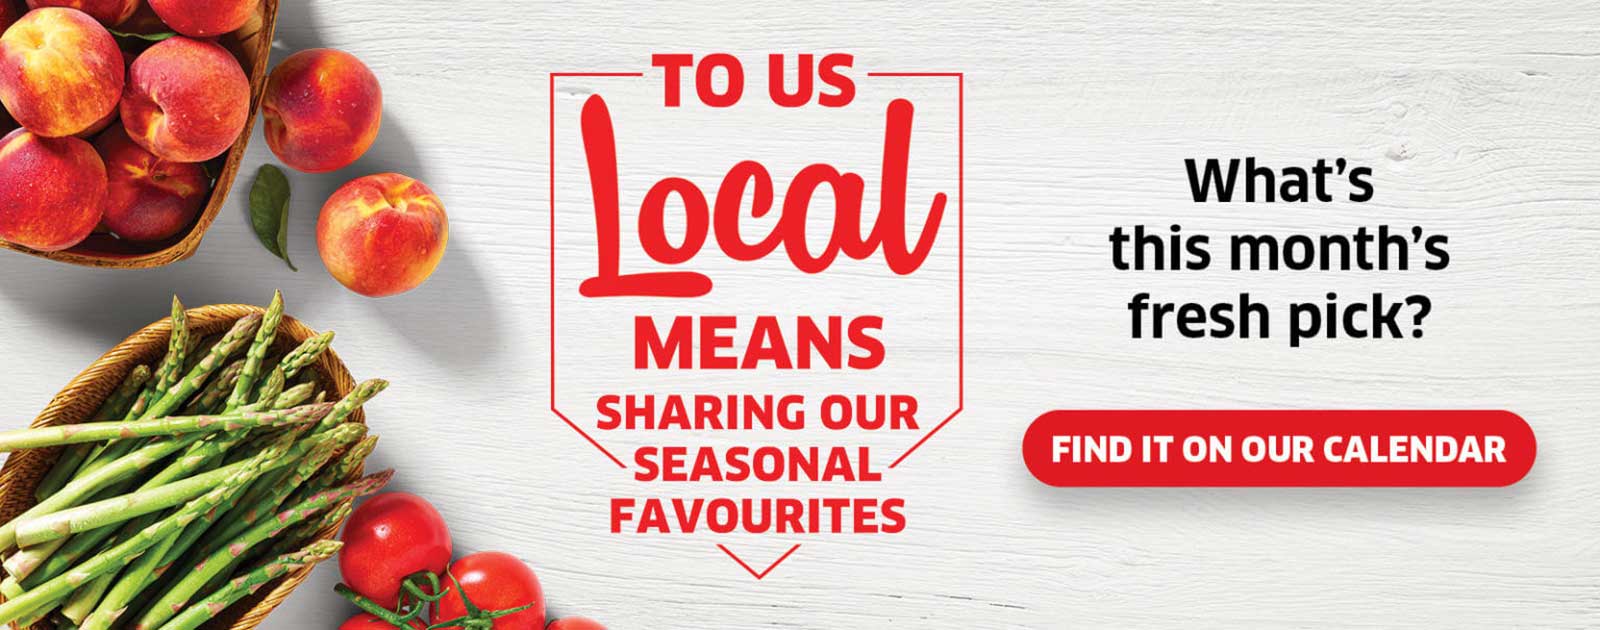 To us local means sharing our seasonal favourites